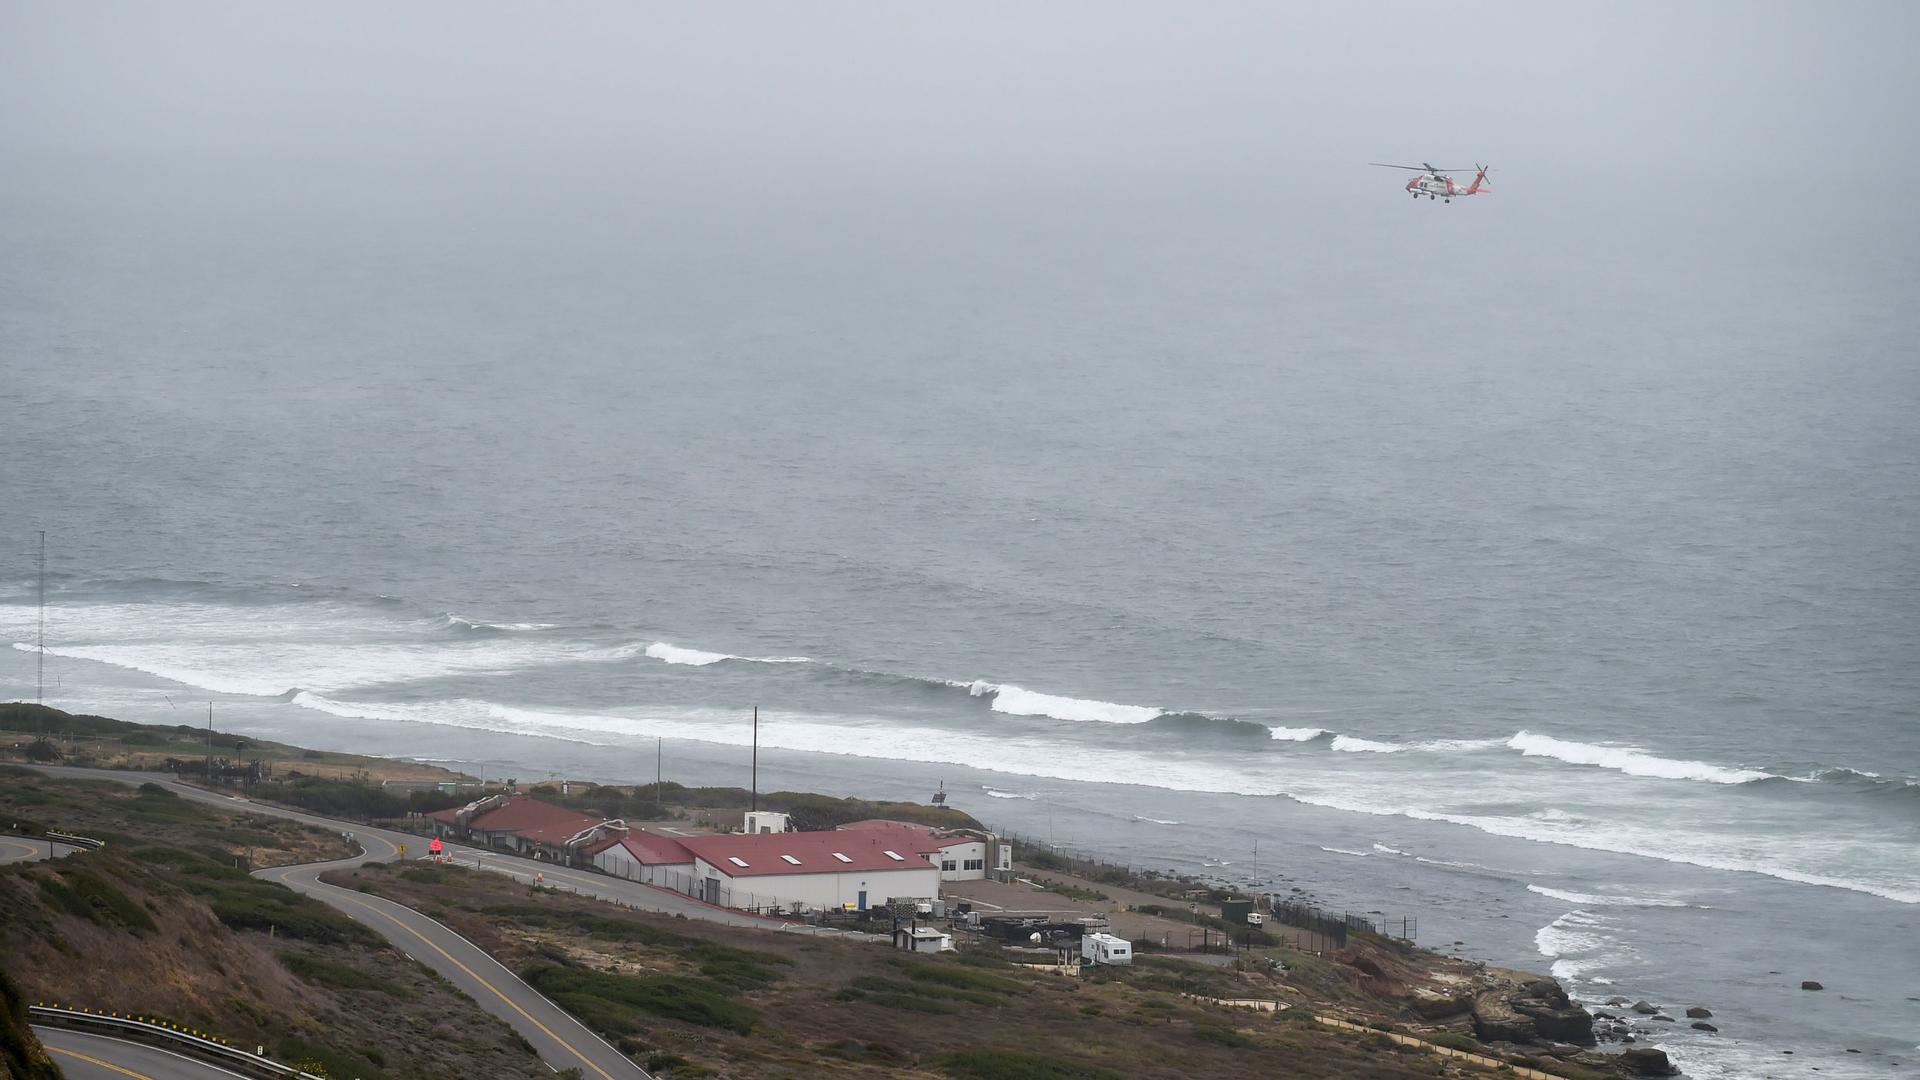 Waves are shown crashing into San Diego's coastline with a rescue helicopter flying above.